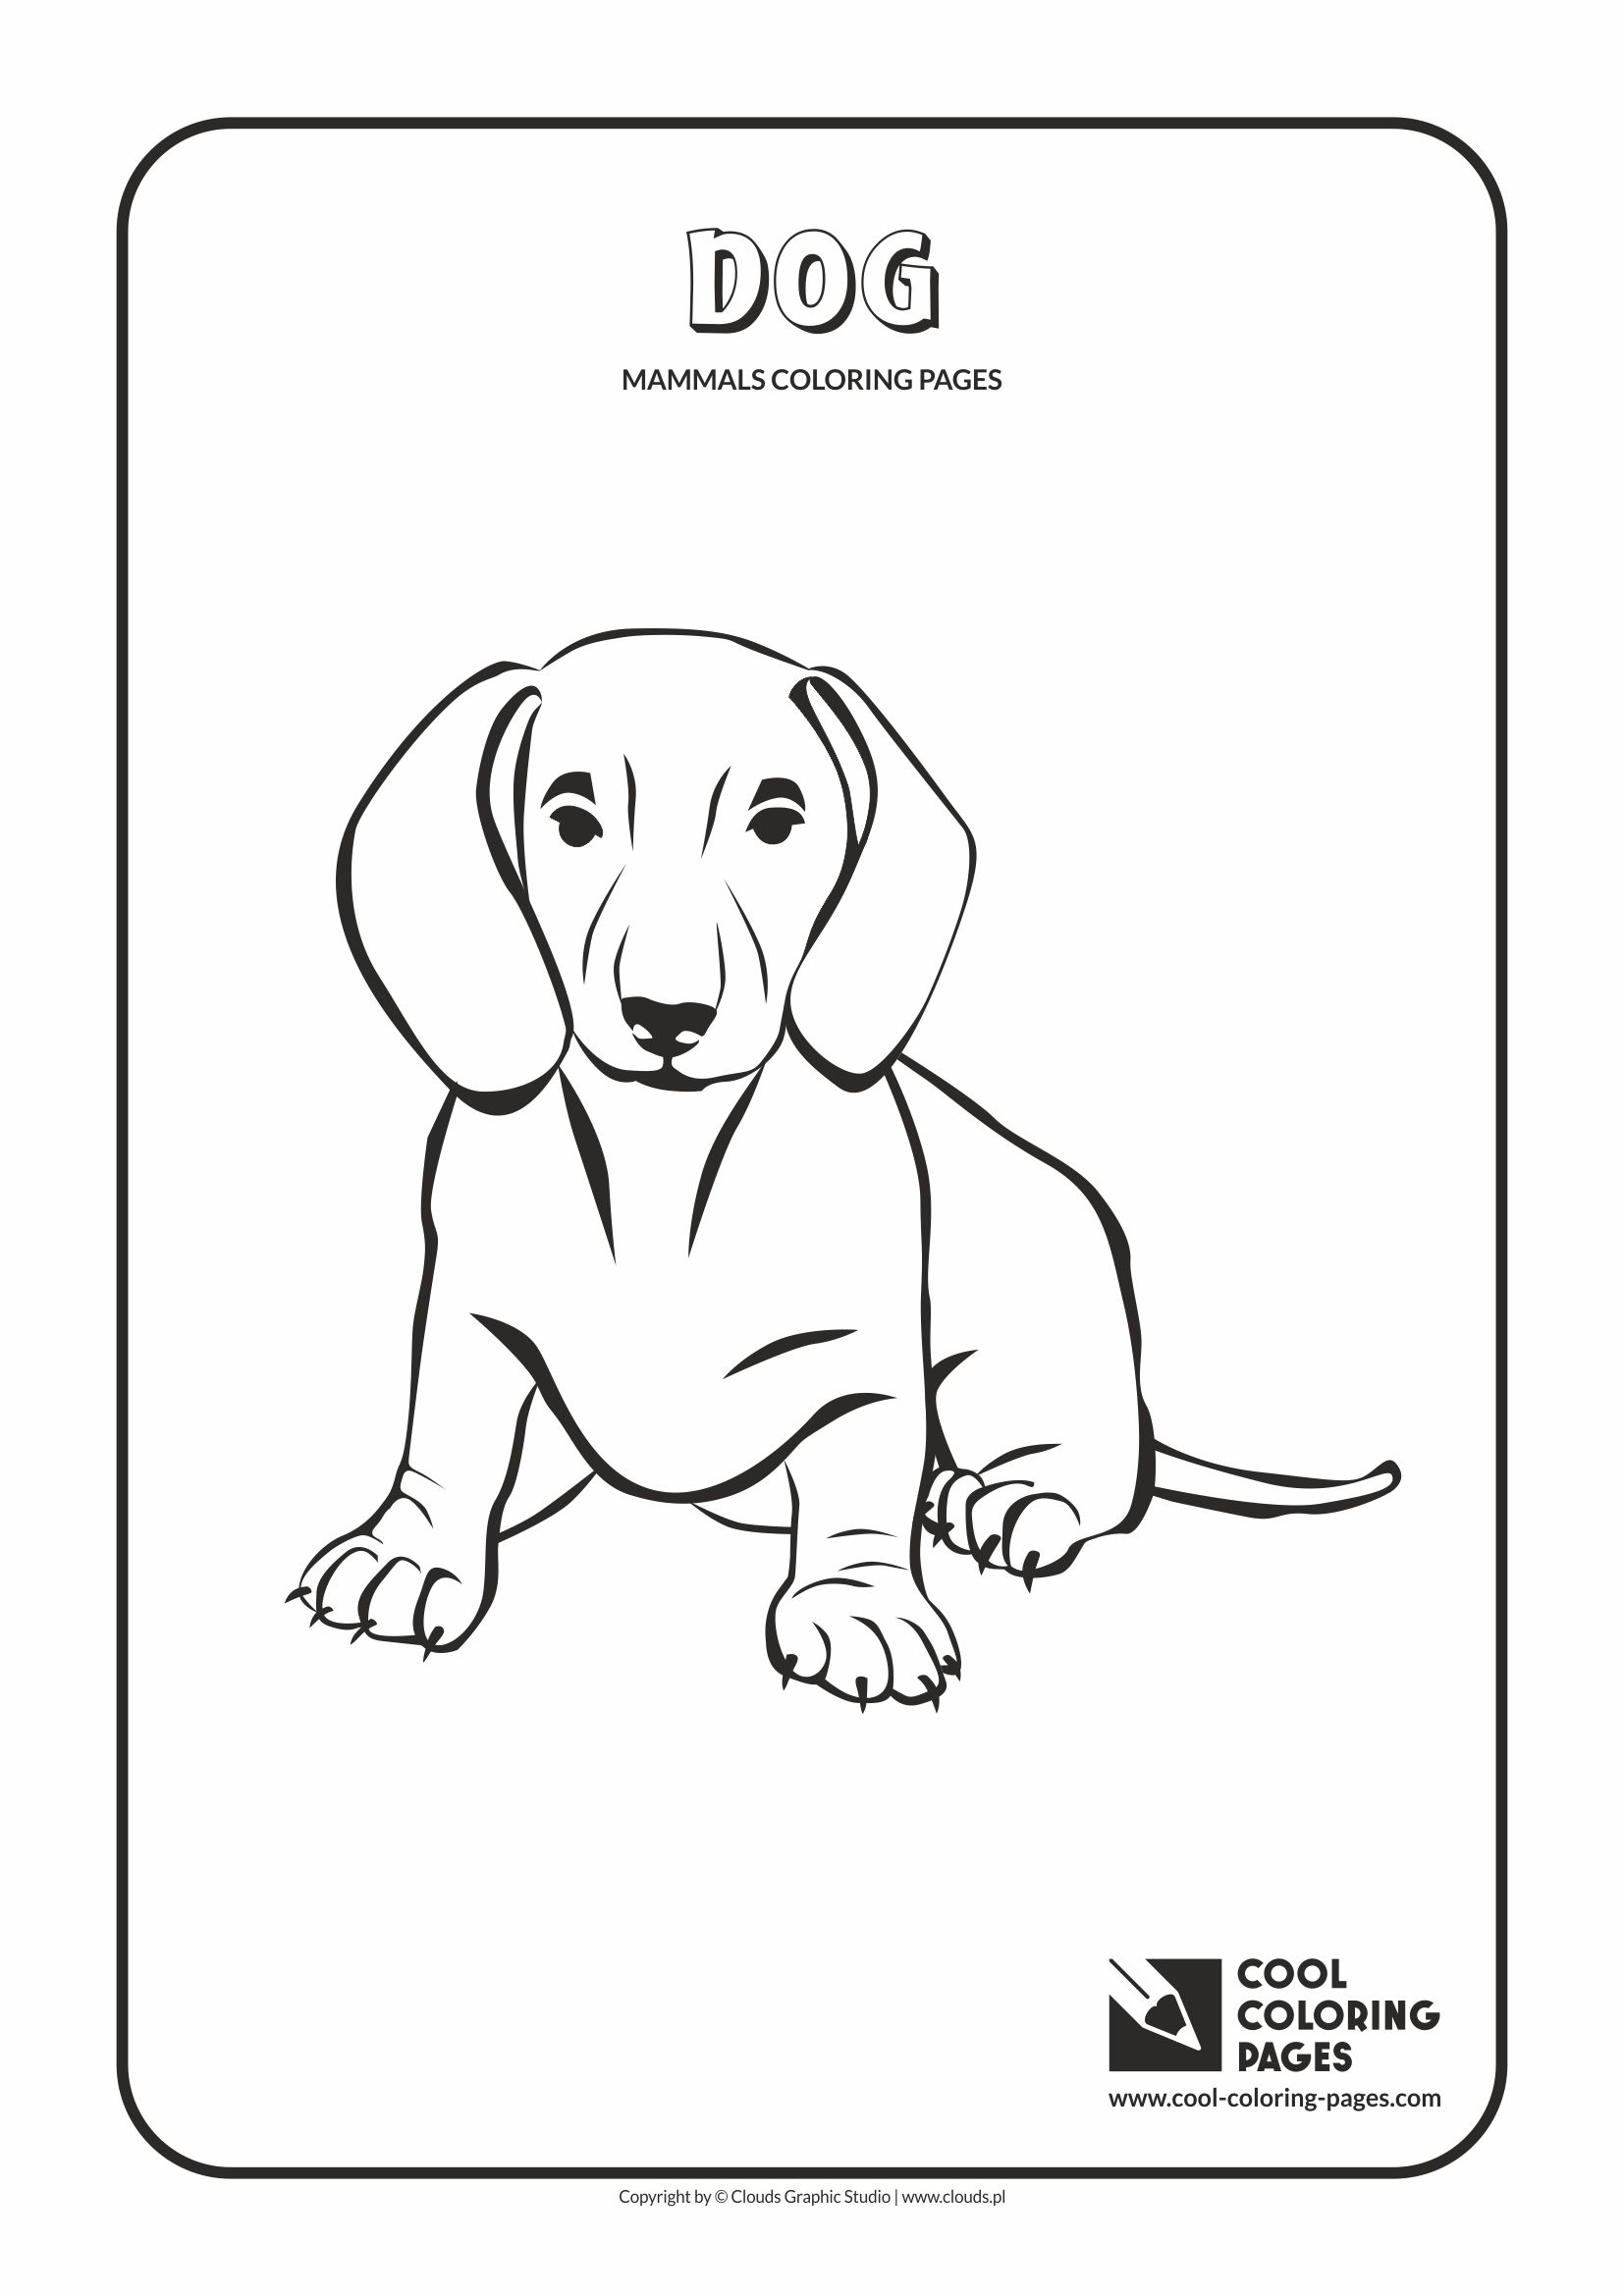 Cool Coloring Pages - Animals / Mammals. Coloring with dog